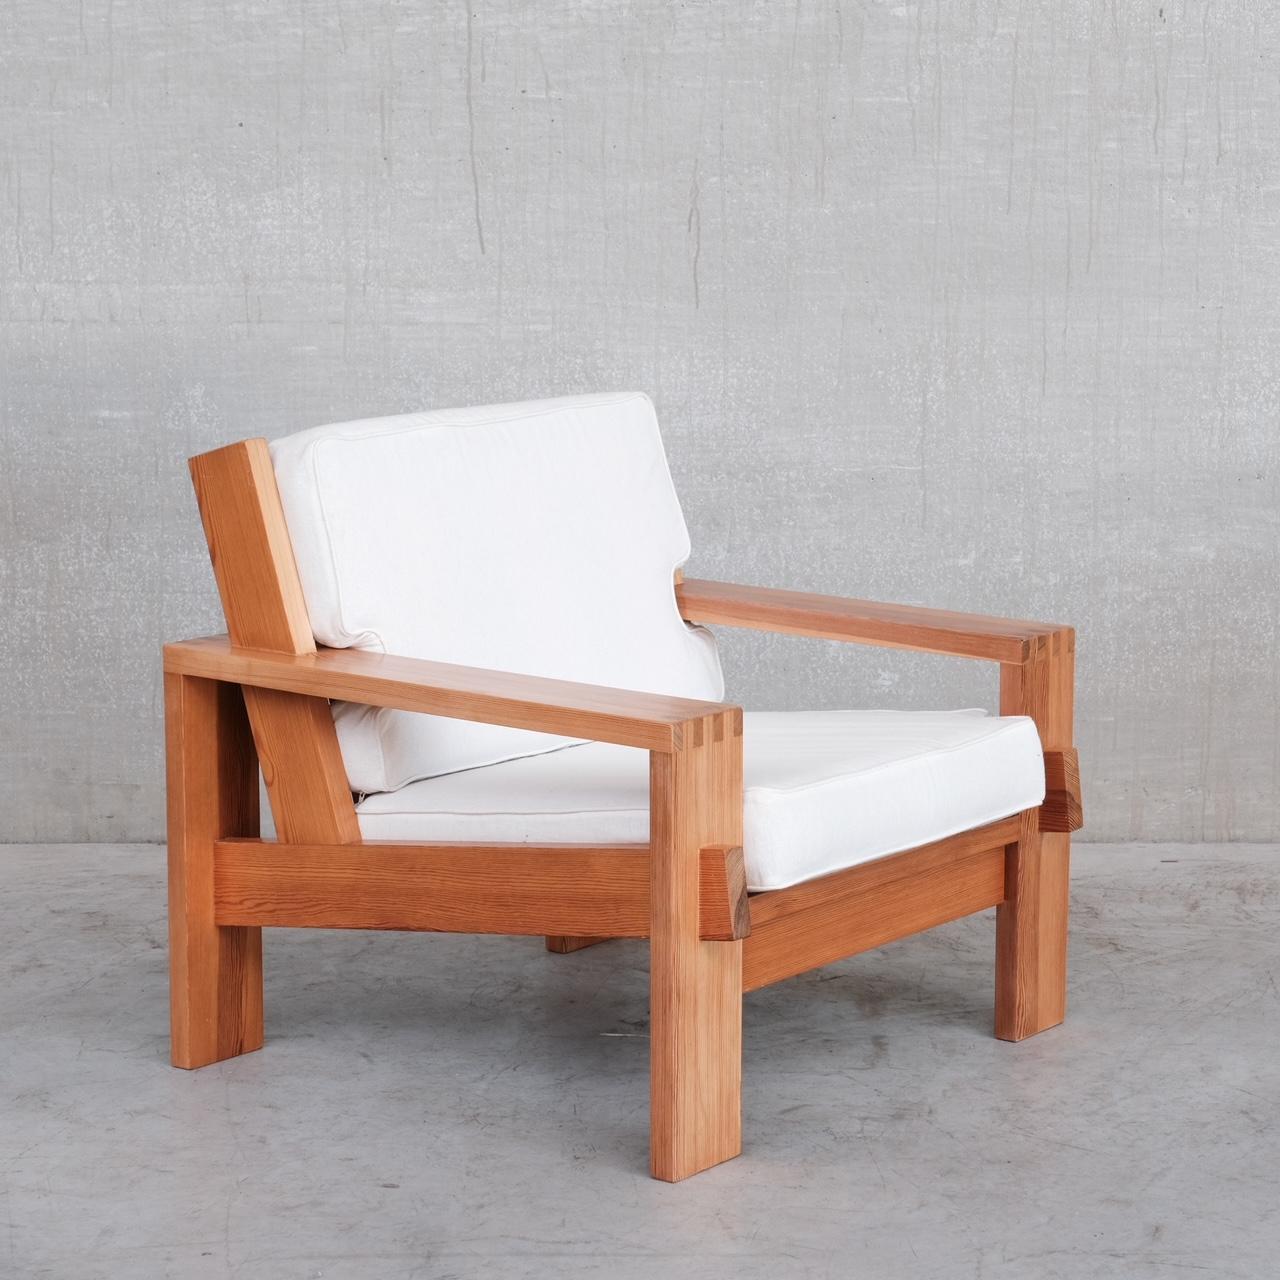 A pair of stylish pine armchairs, with white upholstered cushions. 

France, c1960s. 

Likely from an Alps resort. 

Price is for the pair. 

Generally good condition, some scuffs and wear commensurate with age. 

Location: Belgium